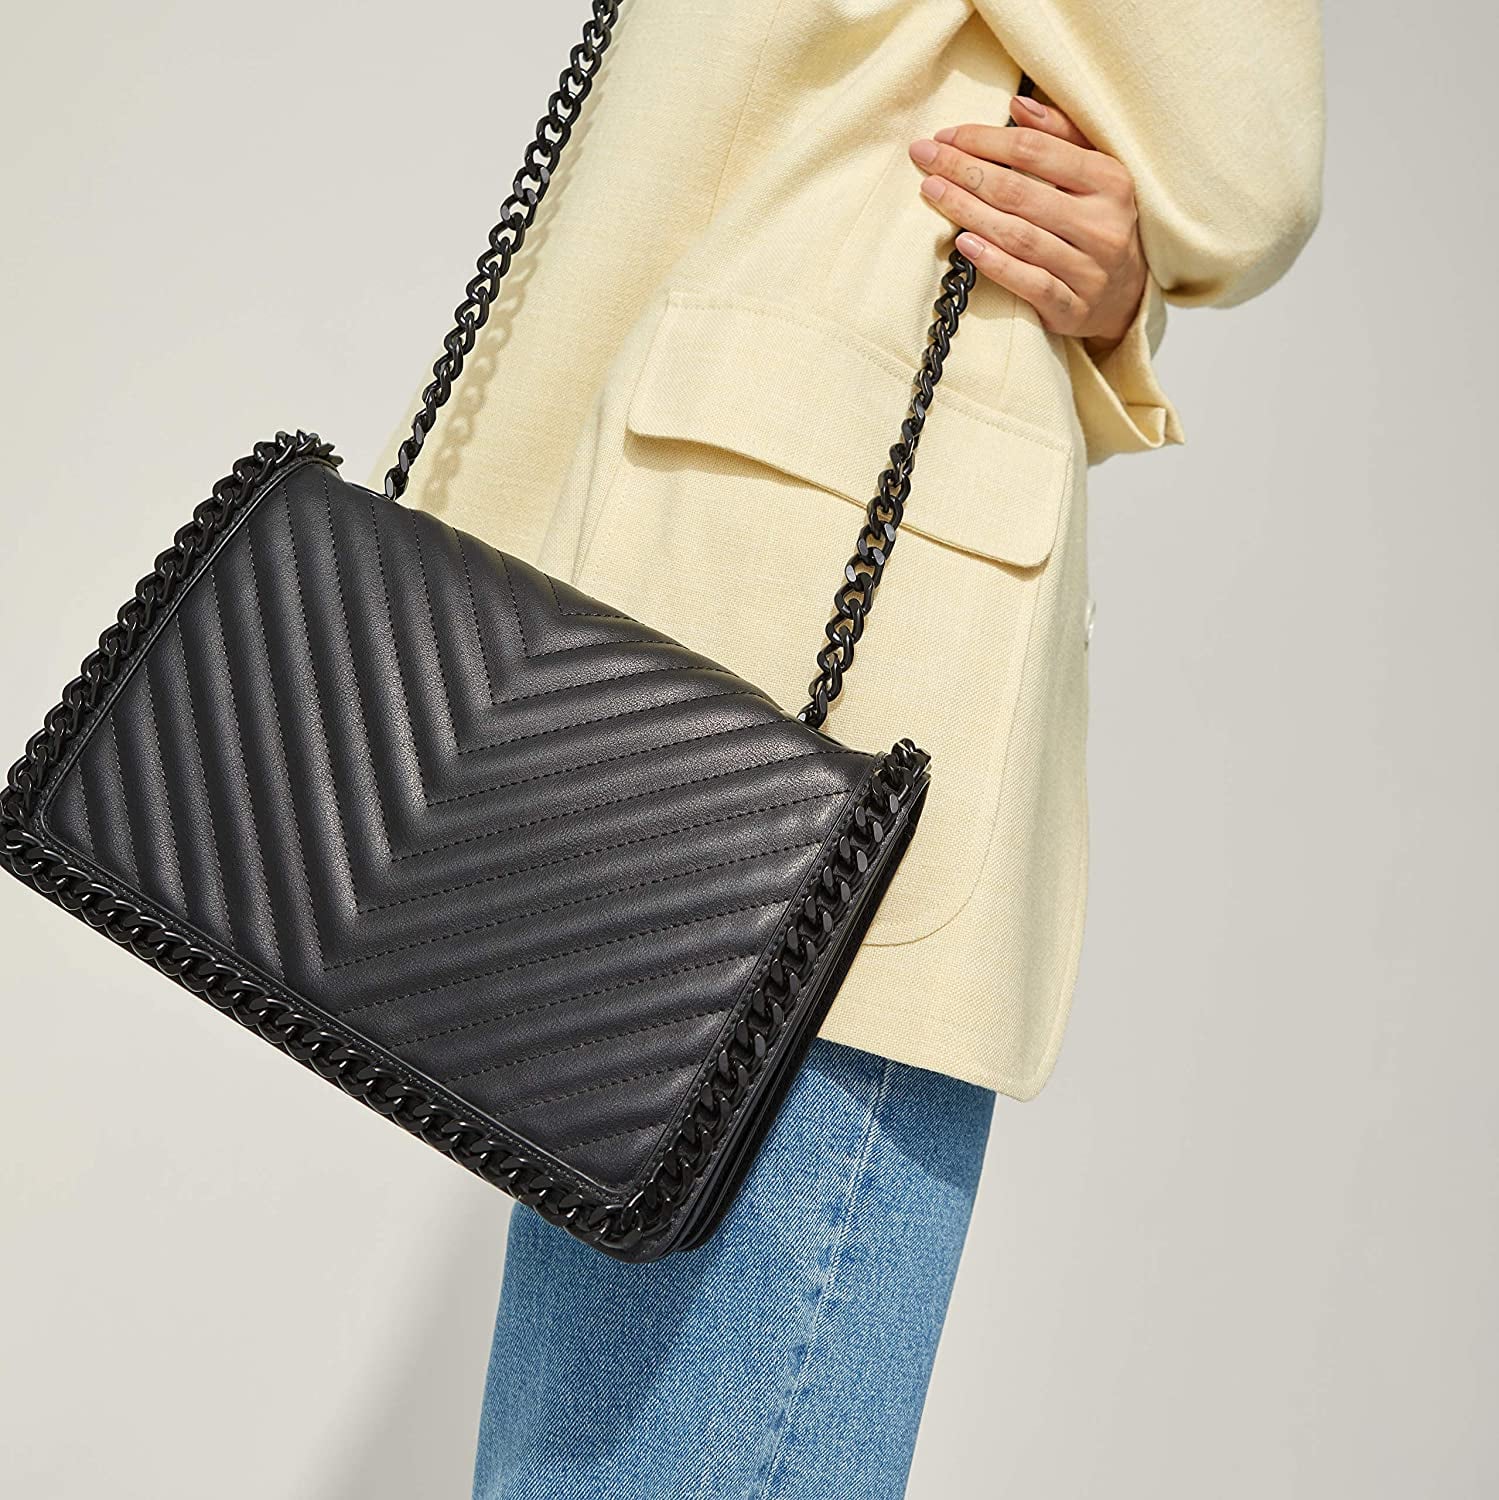 Aldo Greenwald Crossbody Bag, Hold My Wallet, Because These  Prime  Day Deals on Shoes and Bags Are Hard to Resist